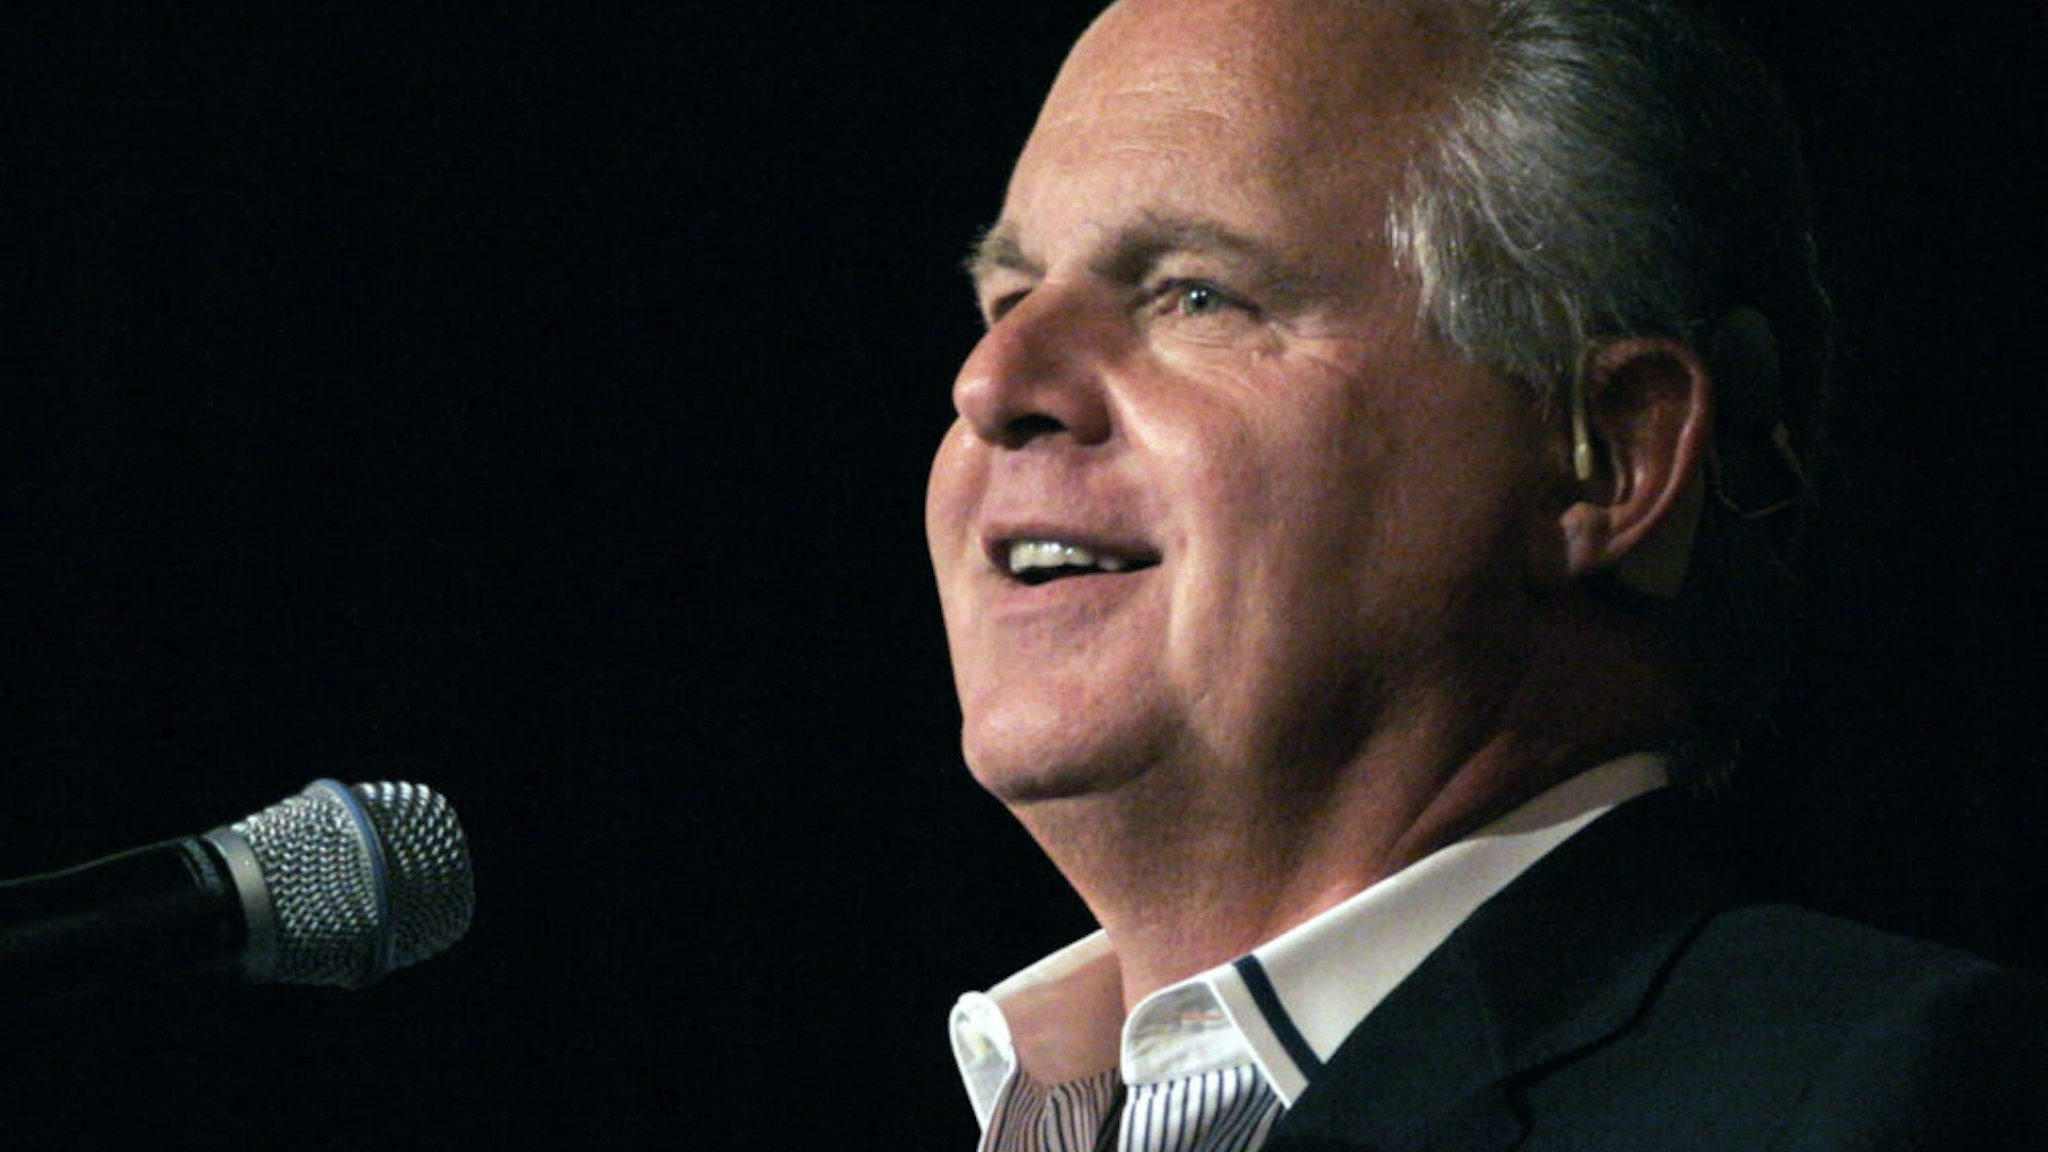 NOVI, MI - MAY 3: Radio talk show host and conservative commentator Rush Limbaugh speaks at "An Evenining With Rush Limbaugh" event May 3, 2007 in Novi, Michigan. The event was sponsored by WJR radio station as part of their 85th birthday celebration festivities.